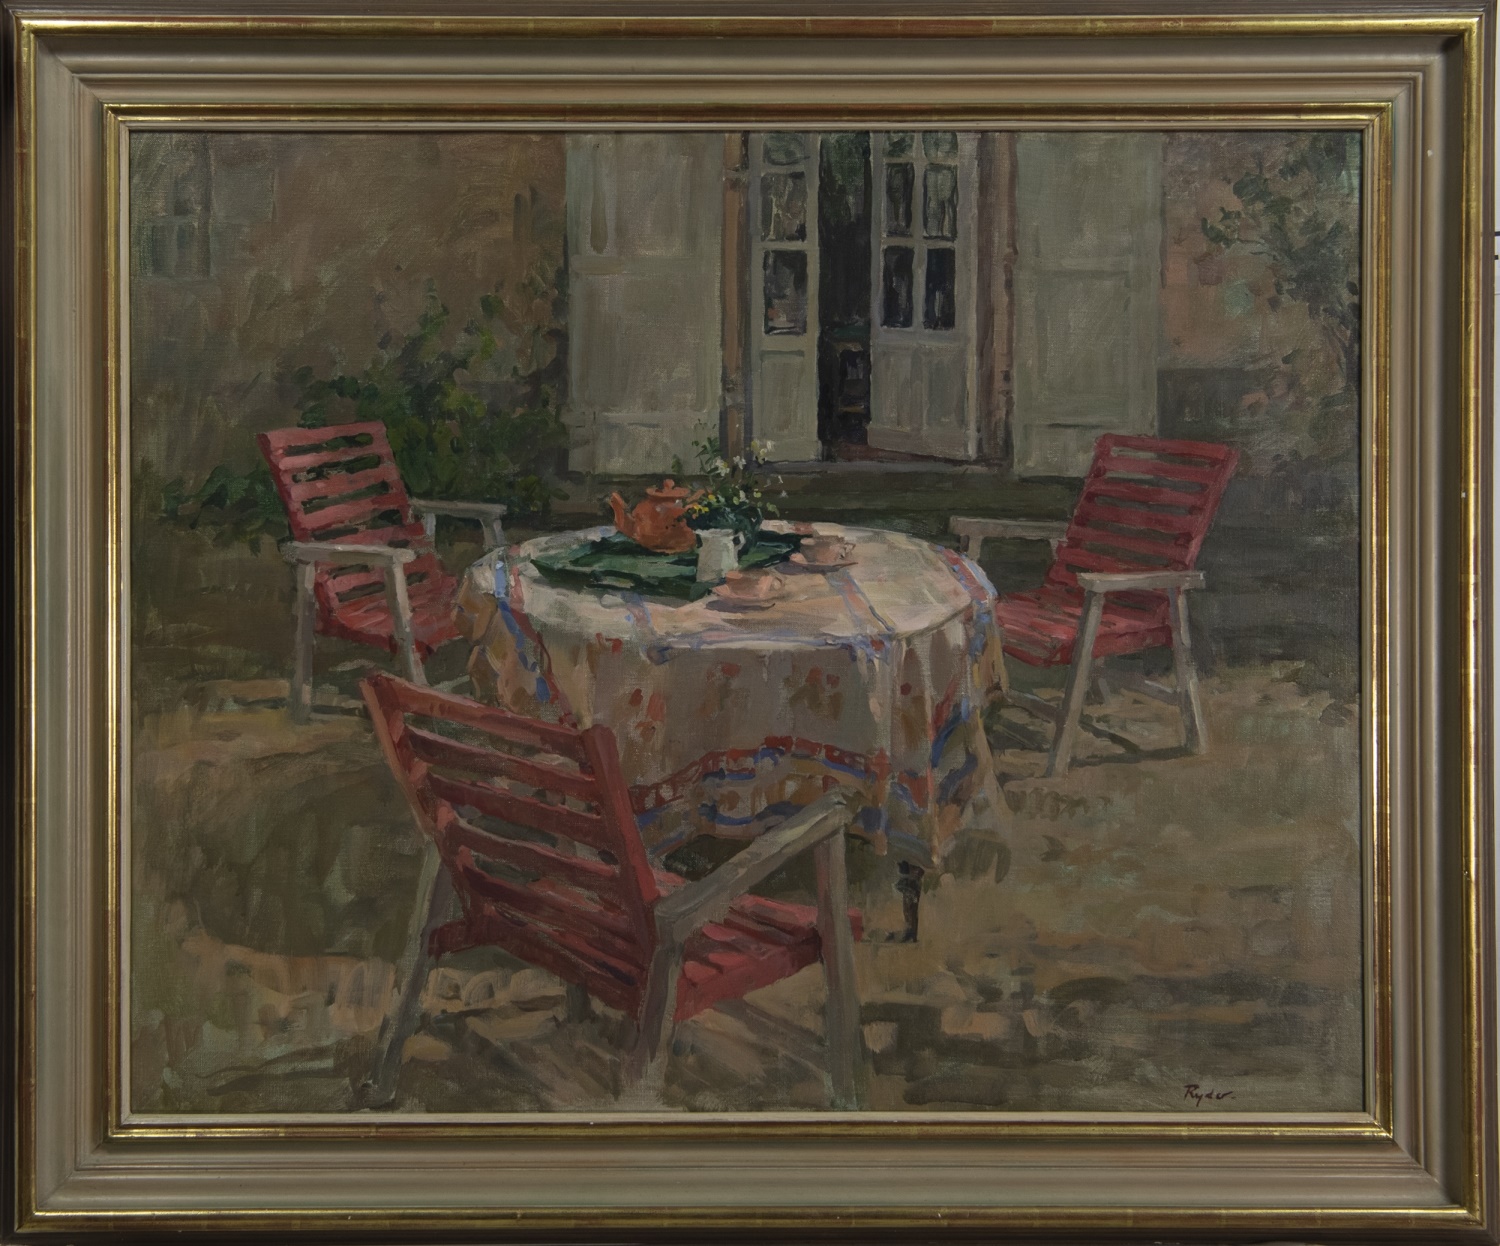 TEA TABLE WITH RED CHAIRS, AN OIL BY SUSAN RYDER